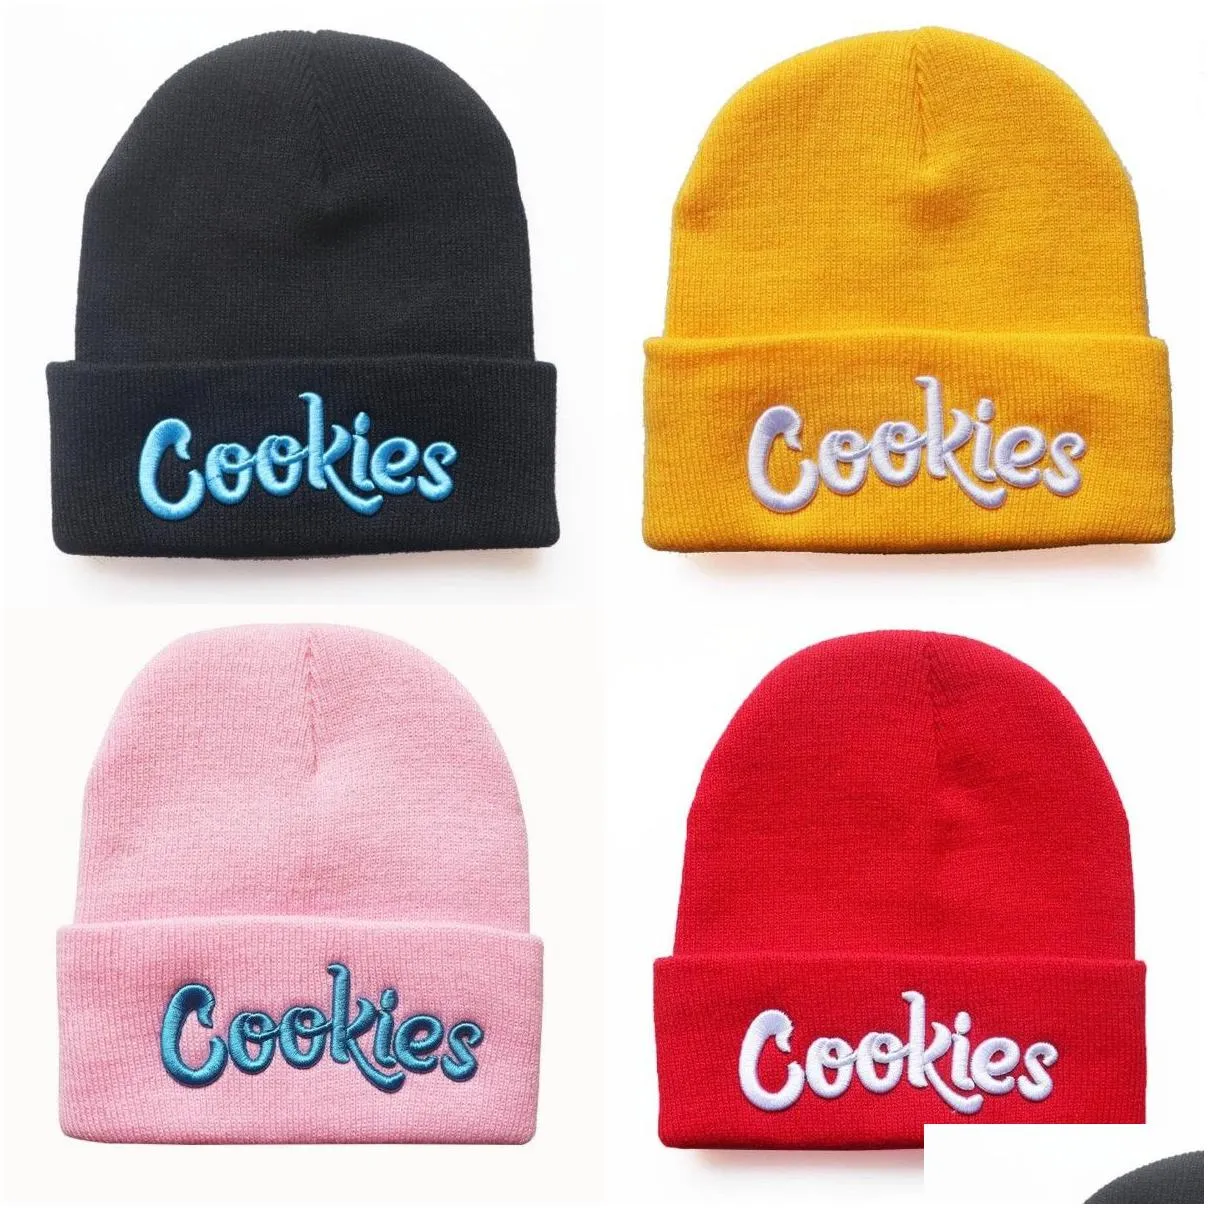 uni winter autumn short letter skull caps embroidery knitted beanies hat men women keep warm cold caps 15 colors